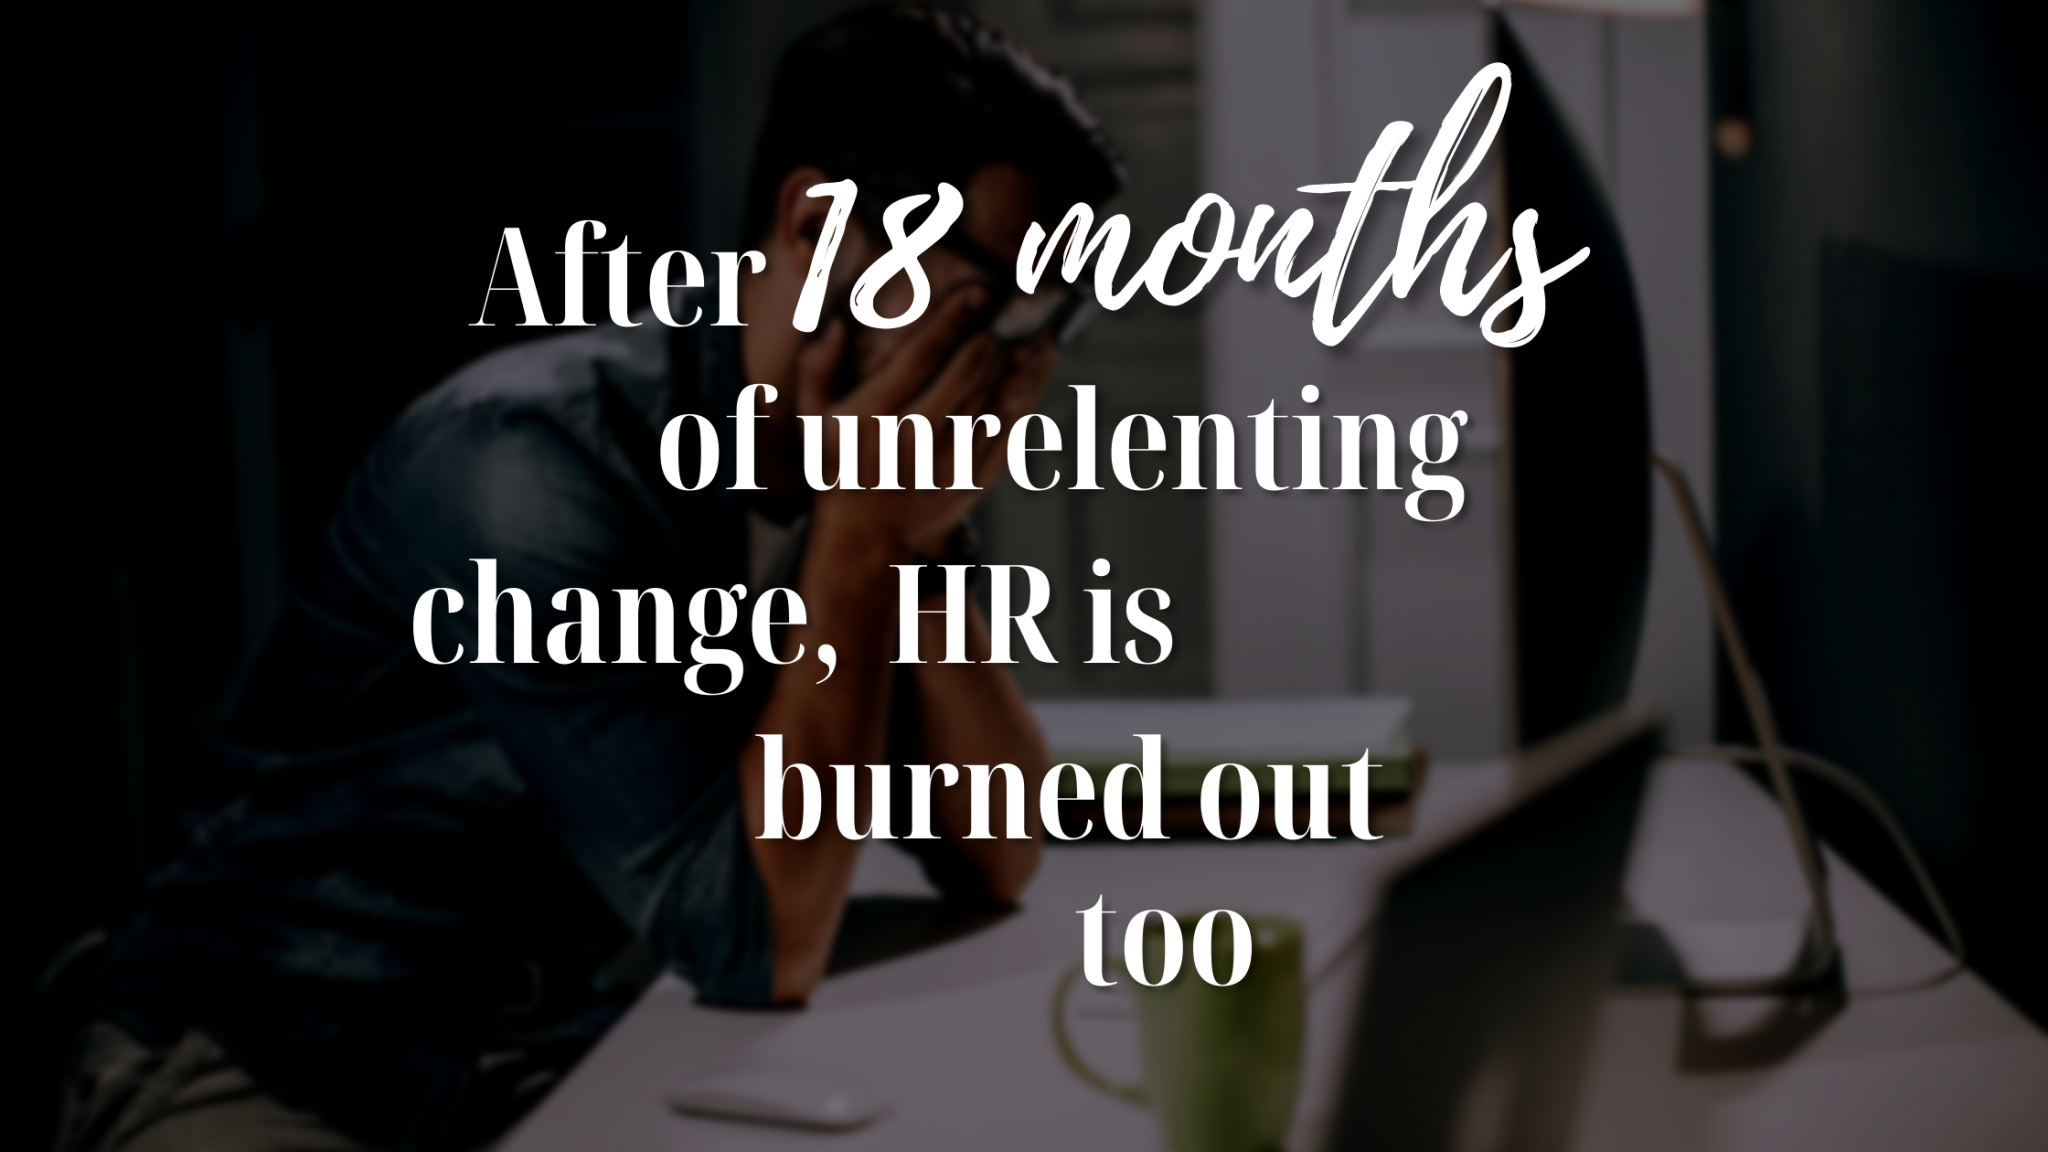 After 18 Months of Unrelenting Change, HR is Burned Out Too